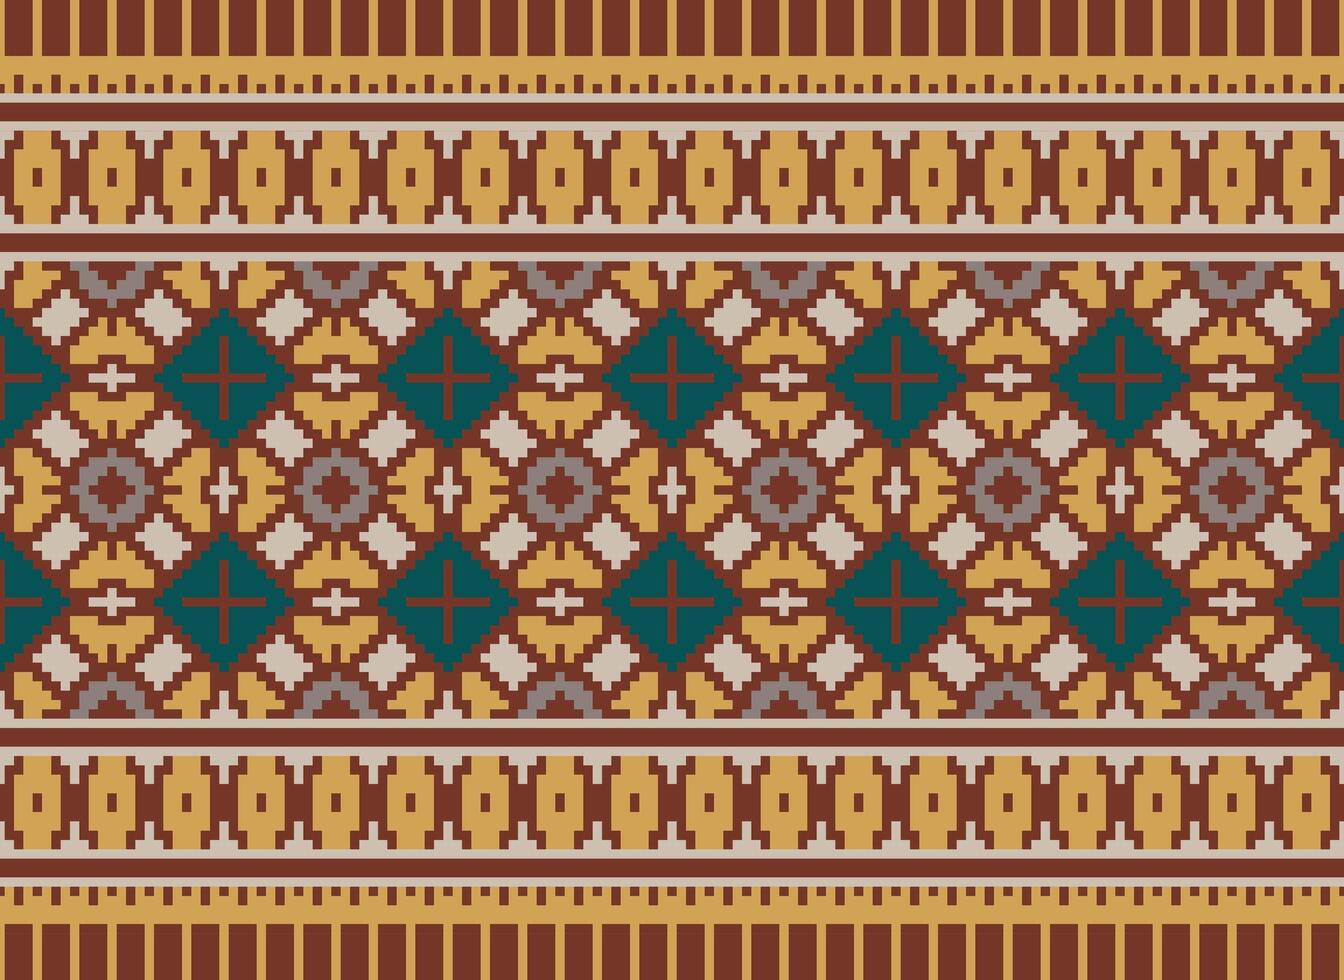 Beautiful floral cross stitch pattern.geometric ethnic oriental pattern traditional background.Aztec style abstract vector illustration.design for texture,fabric,clothing,wrapping,decoration,carpet.